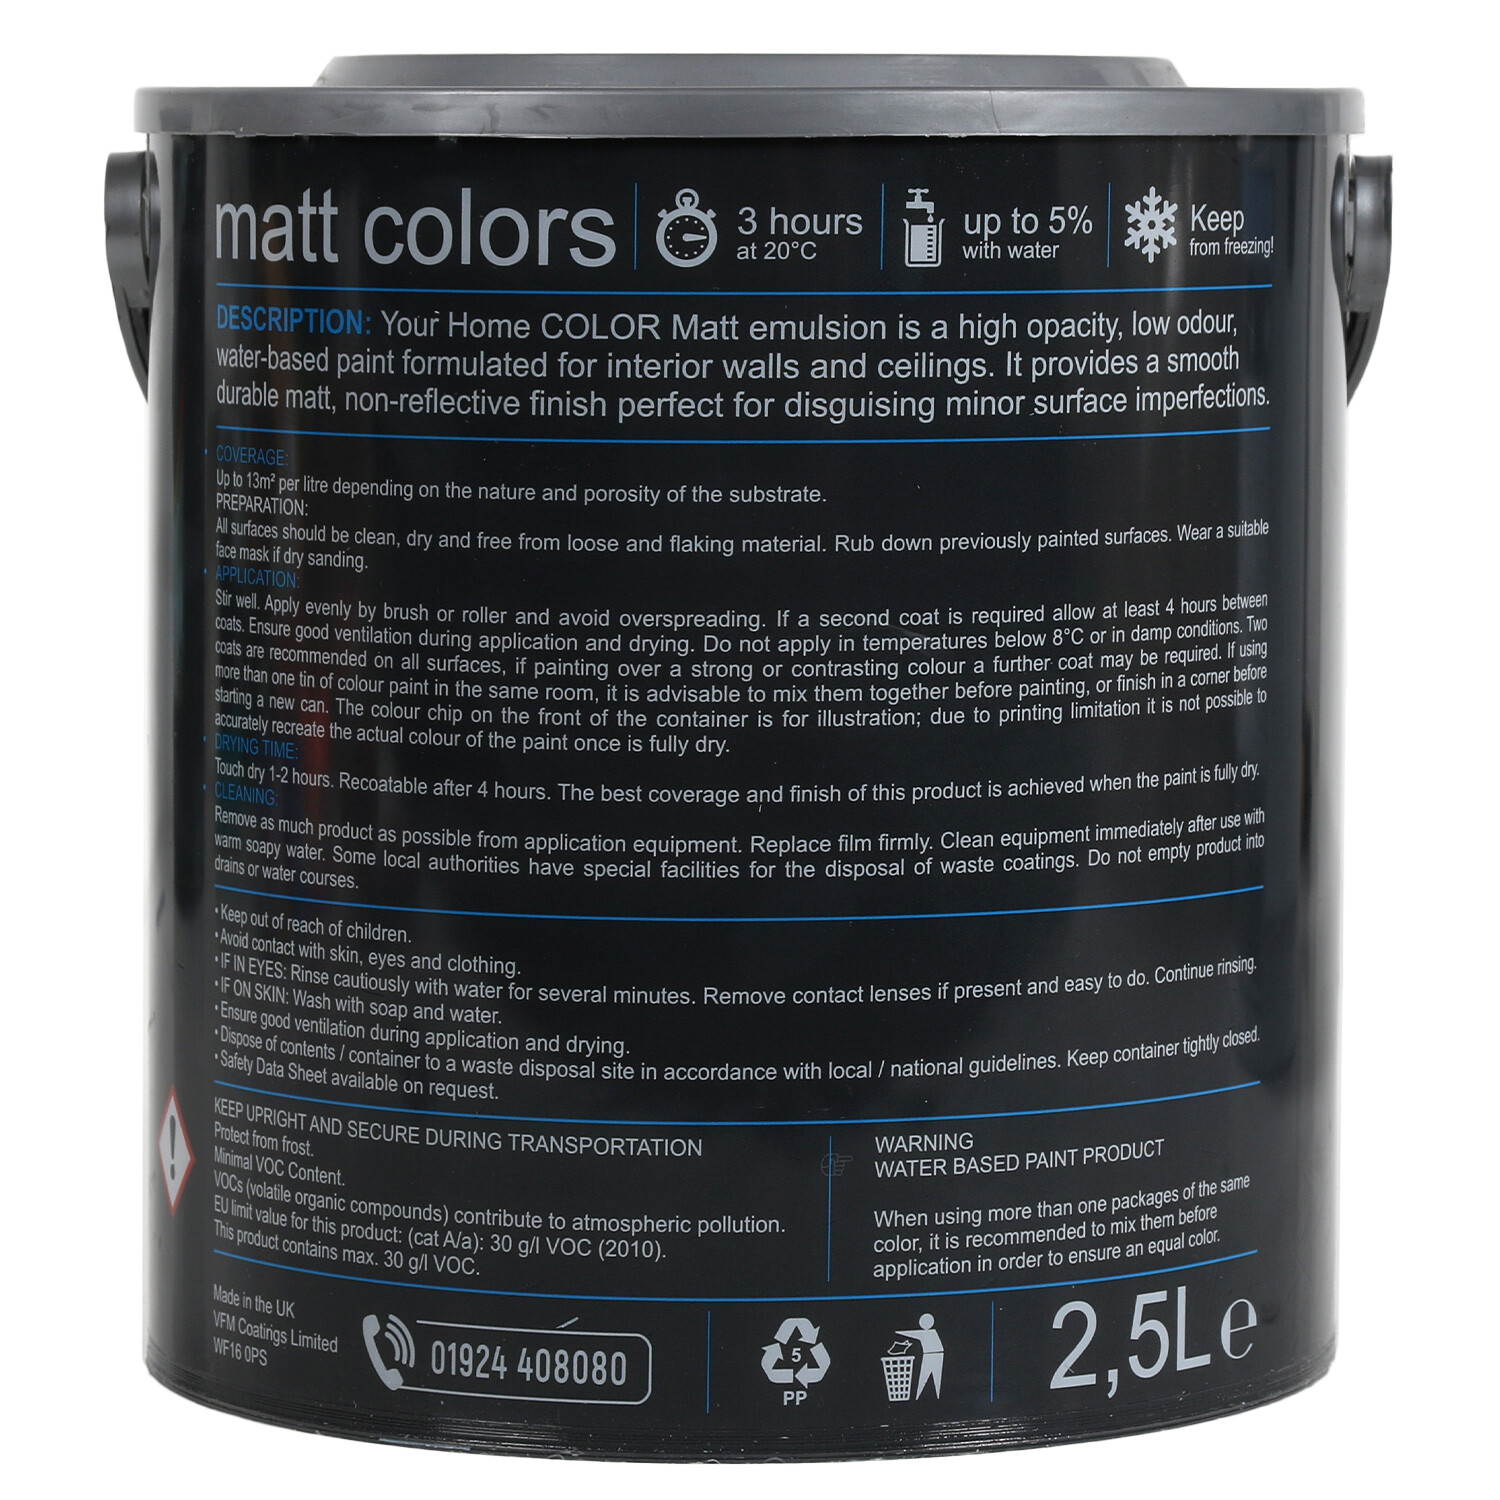 Your Home Walls & Ceilings Whispered Willow Matt Emulsion Paint 2.5L Image 2